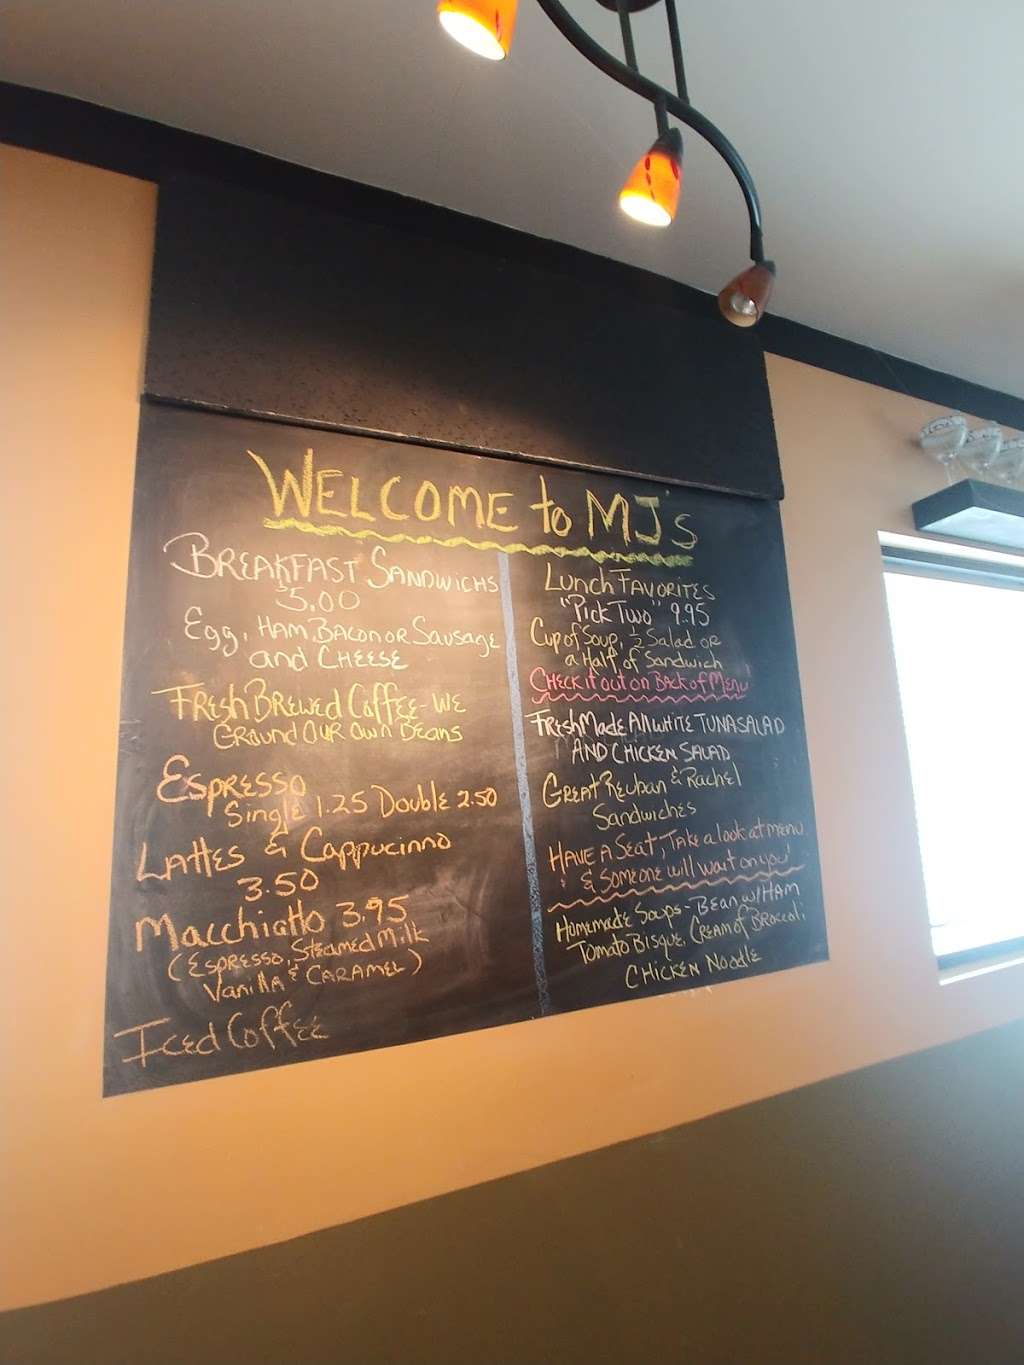 MJs Cafe and Baking Company | 2965 Manchester Rd, Manchester, MD 21102, USA | Phone: (410) 239-8882